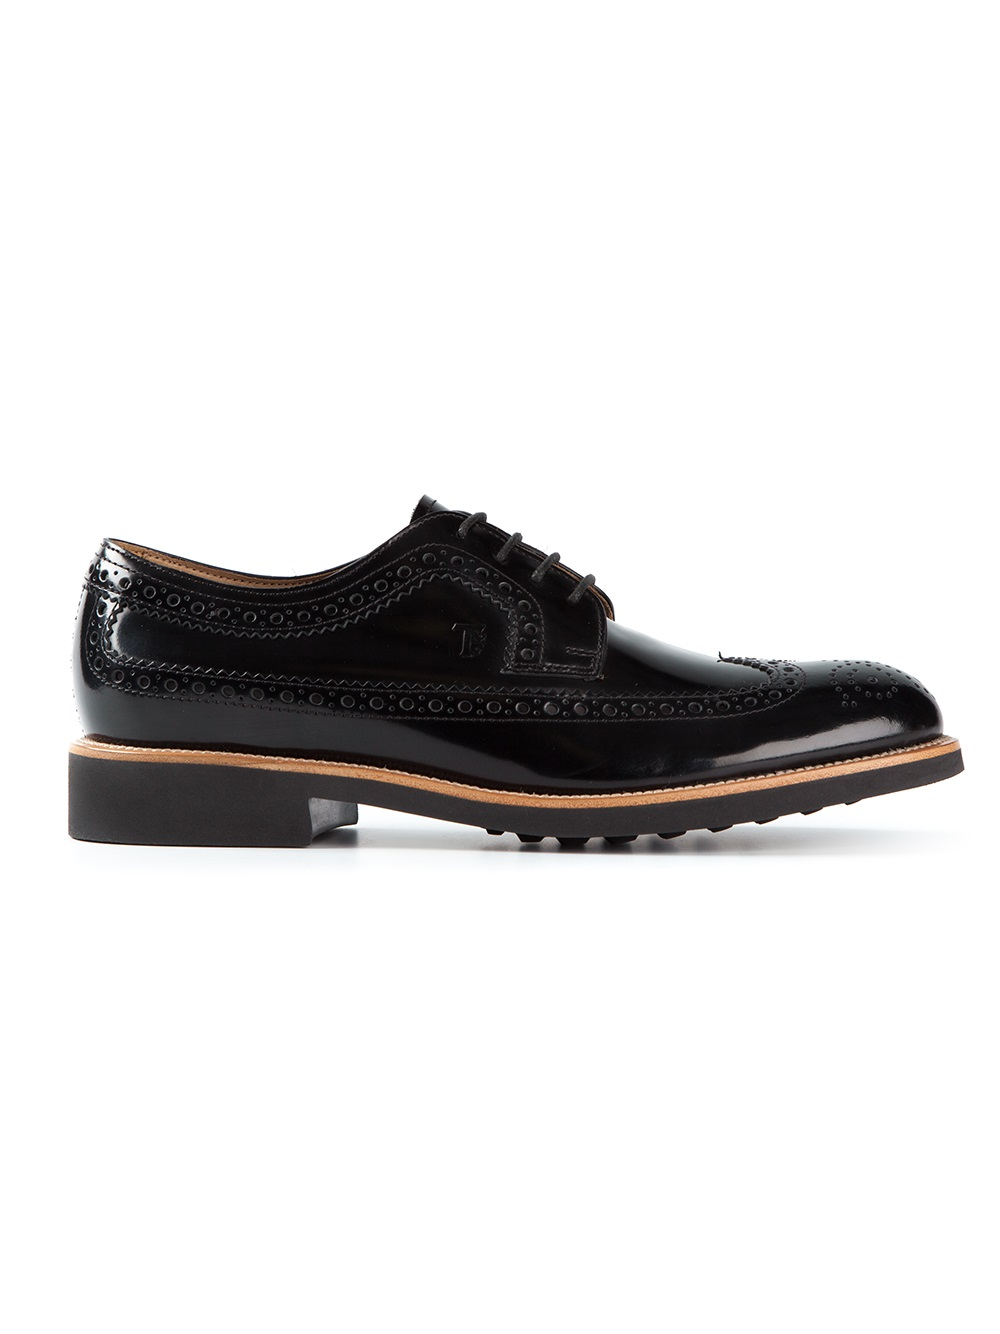 Tod's Chunky Brogues in Black for Men - Lyst